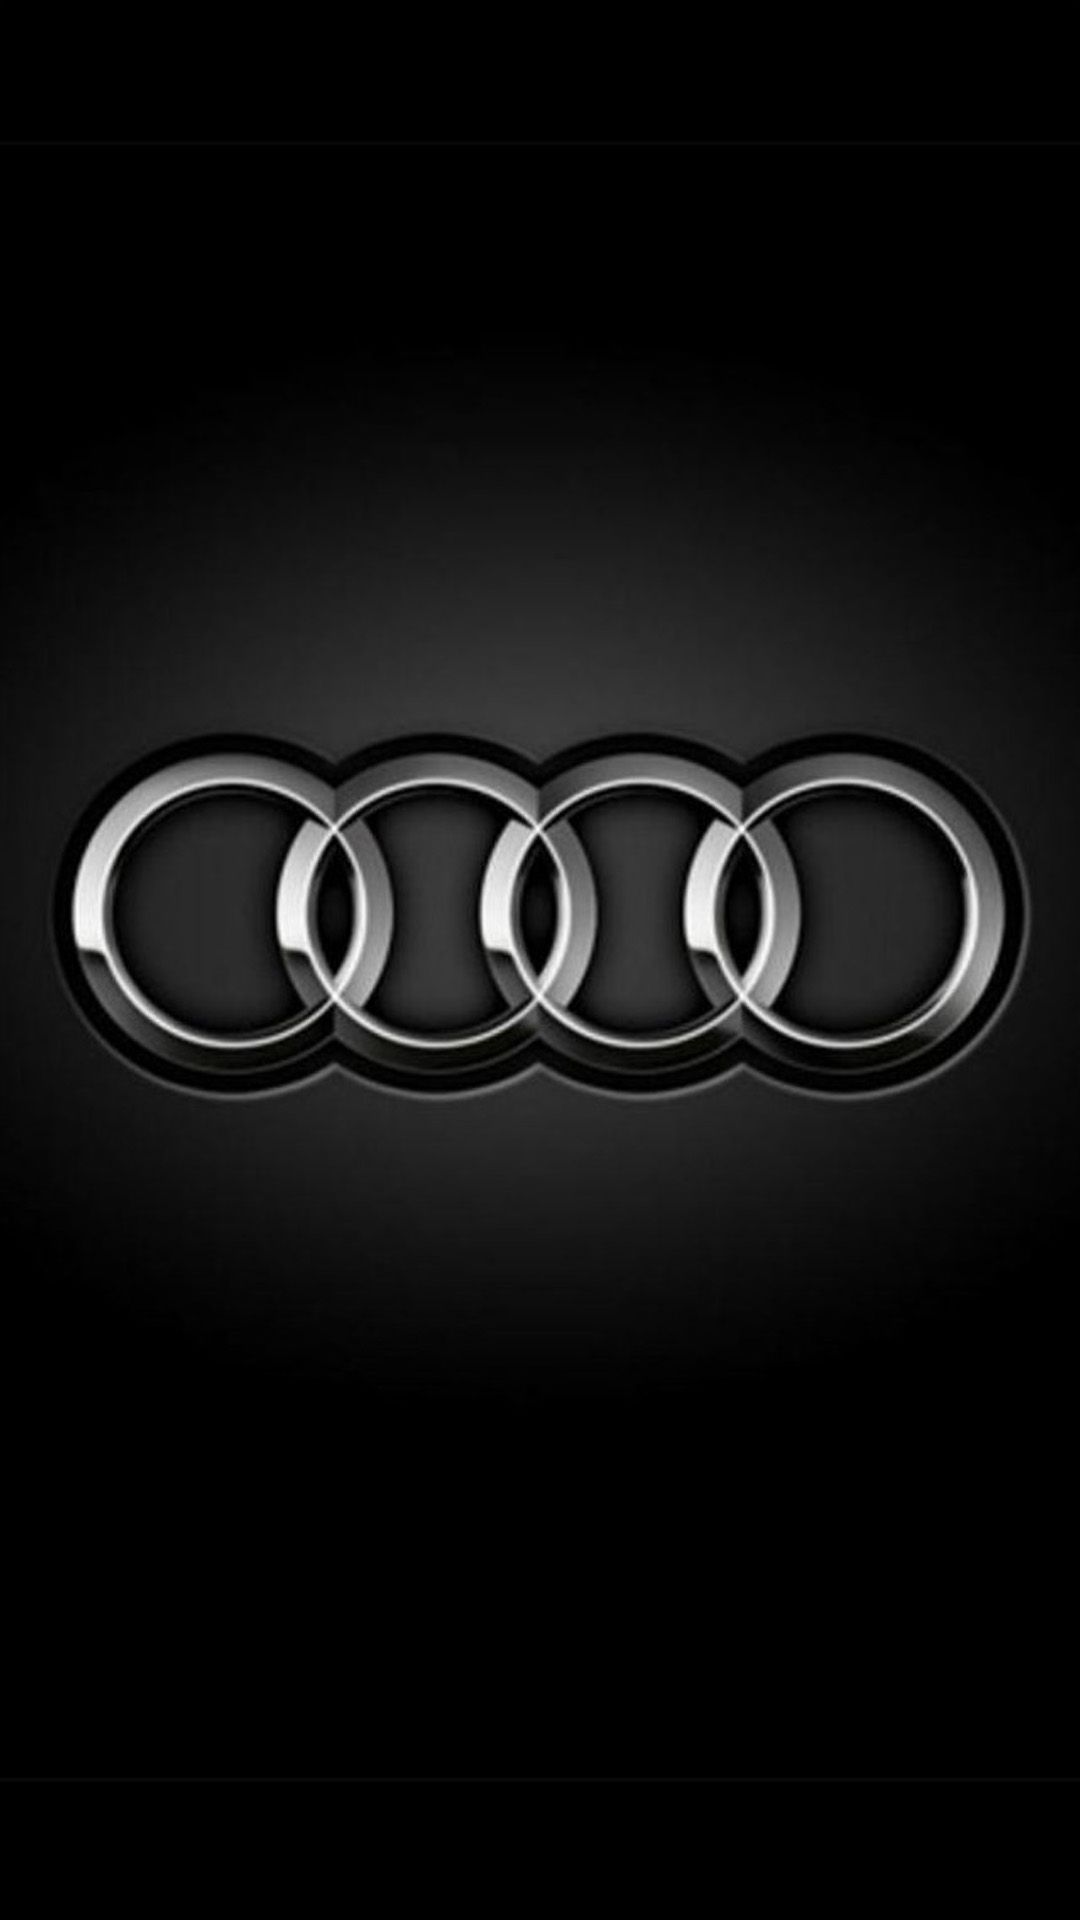 Audi R8 Car Famous Brand Silver Four Rings Wallpaper Gallery